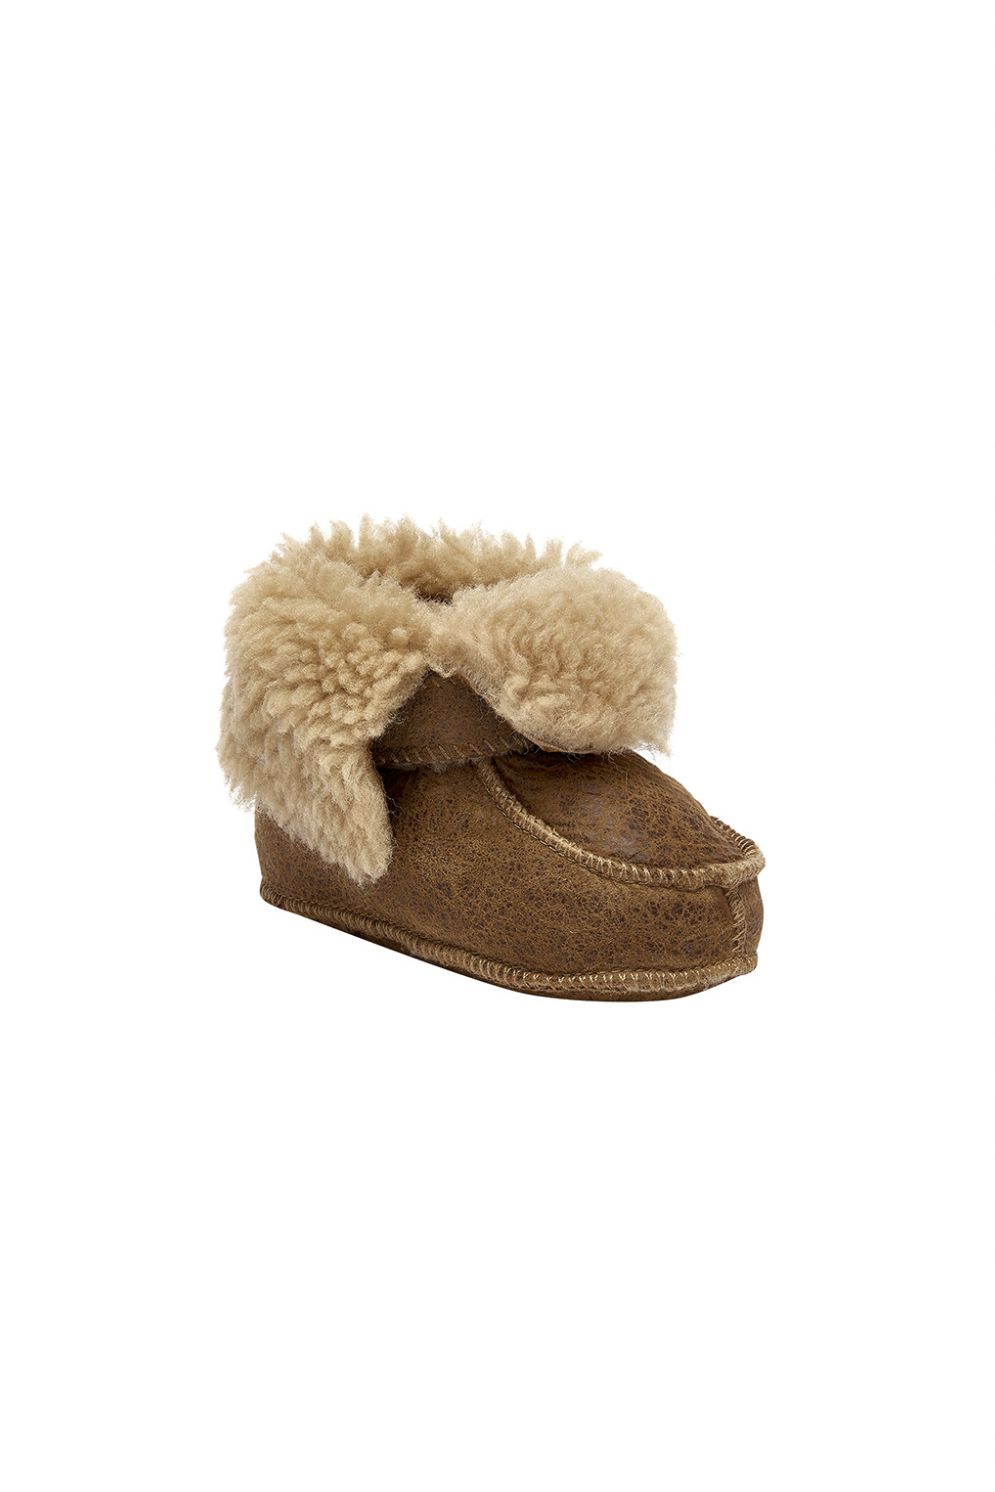 tan sheepskin baby boots gushlow and cole cut out side angle